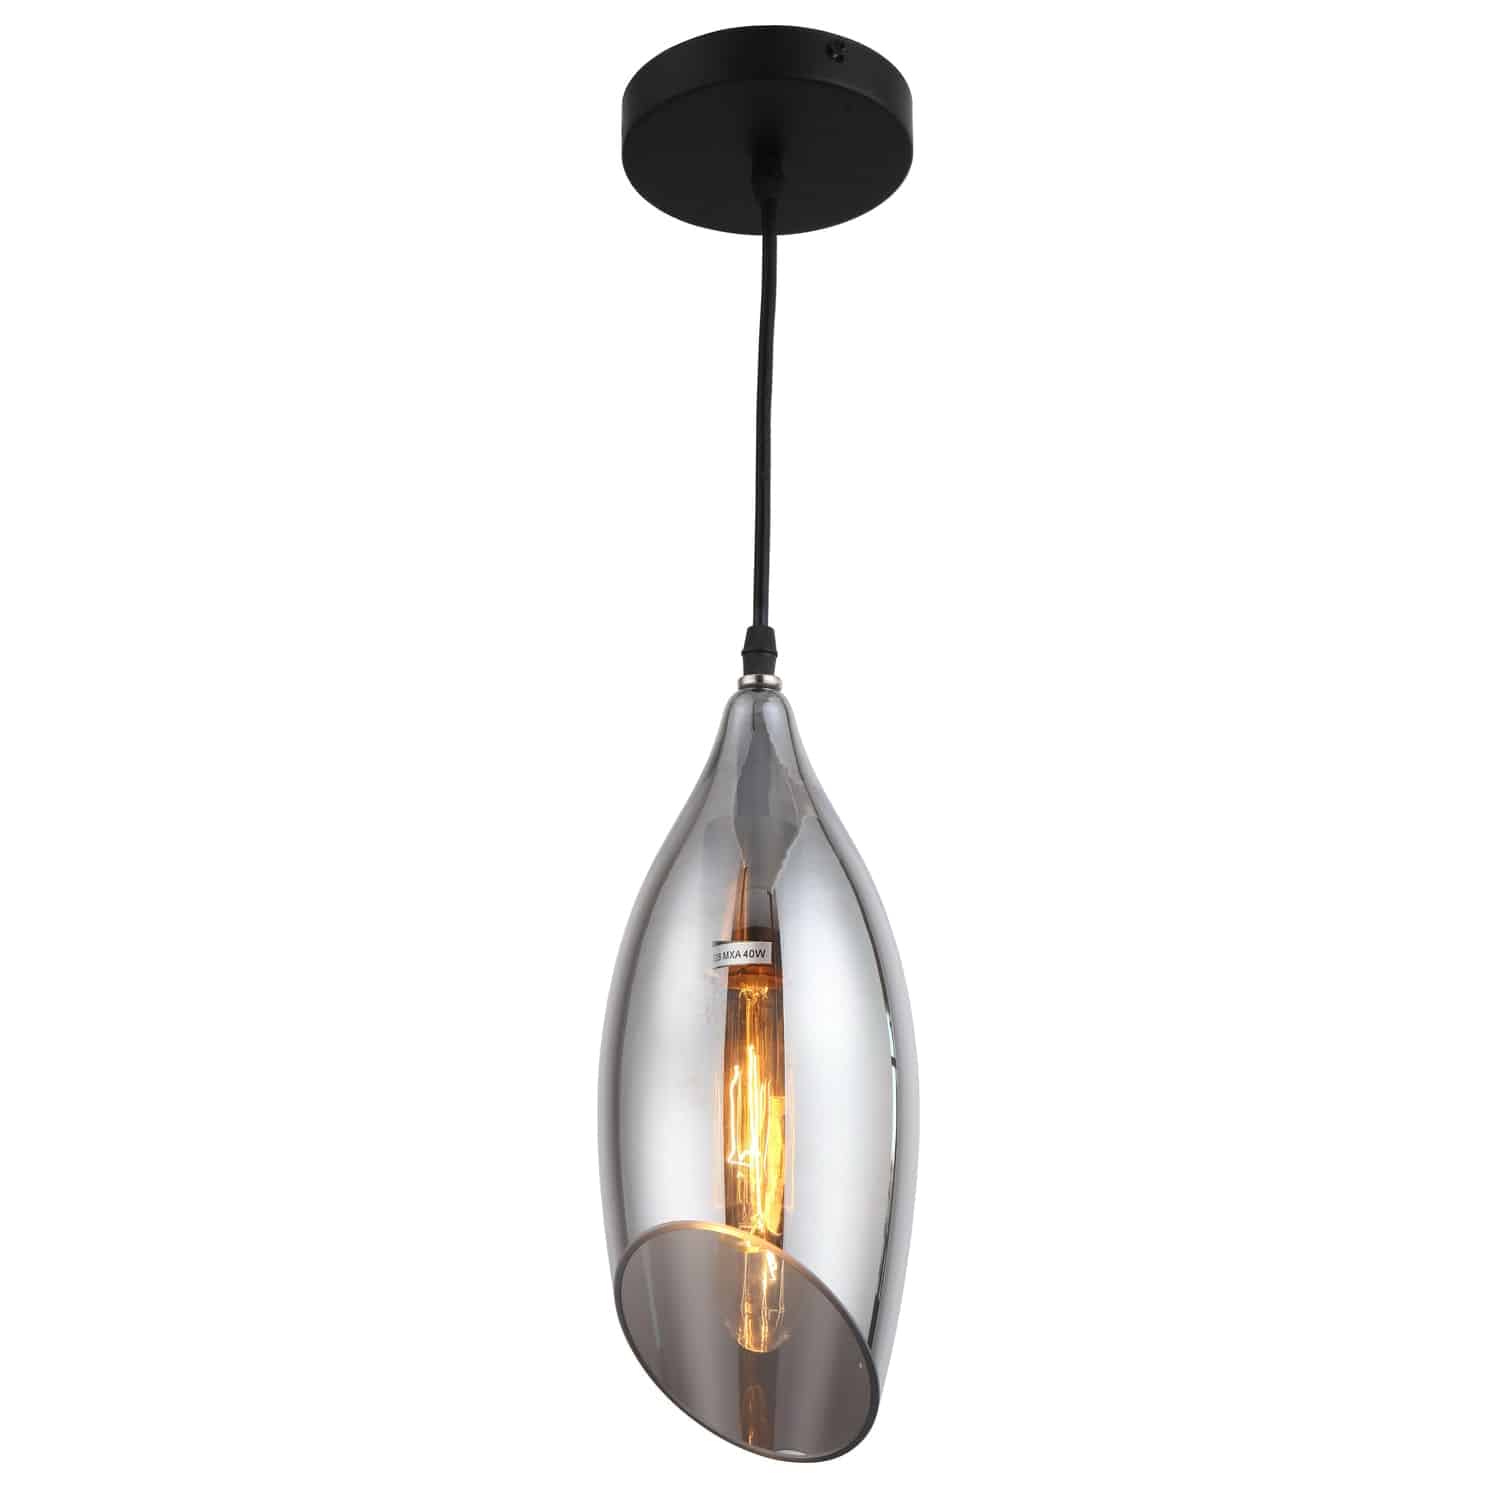 The Abba family of lighting features a deceptively simple design based around an elegant drop of light. It's a clean look with a timeless appeal that will add a touch of luxury to minimalist décors. The metal frame drops to an oval shaped glass fixture for the light, with either an asymmetrical or bright symmetrical configuration. It catches the eye while blending into stylish contemporary furnishings. Abba lighting offers a look that will add interest to a fashionable kitchen or foyer.